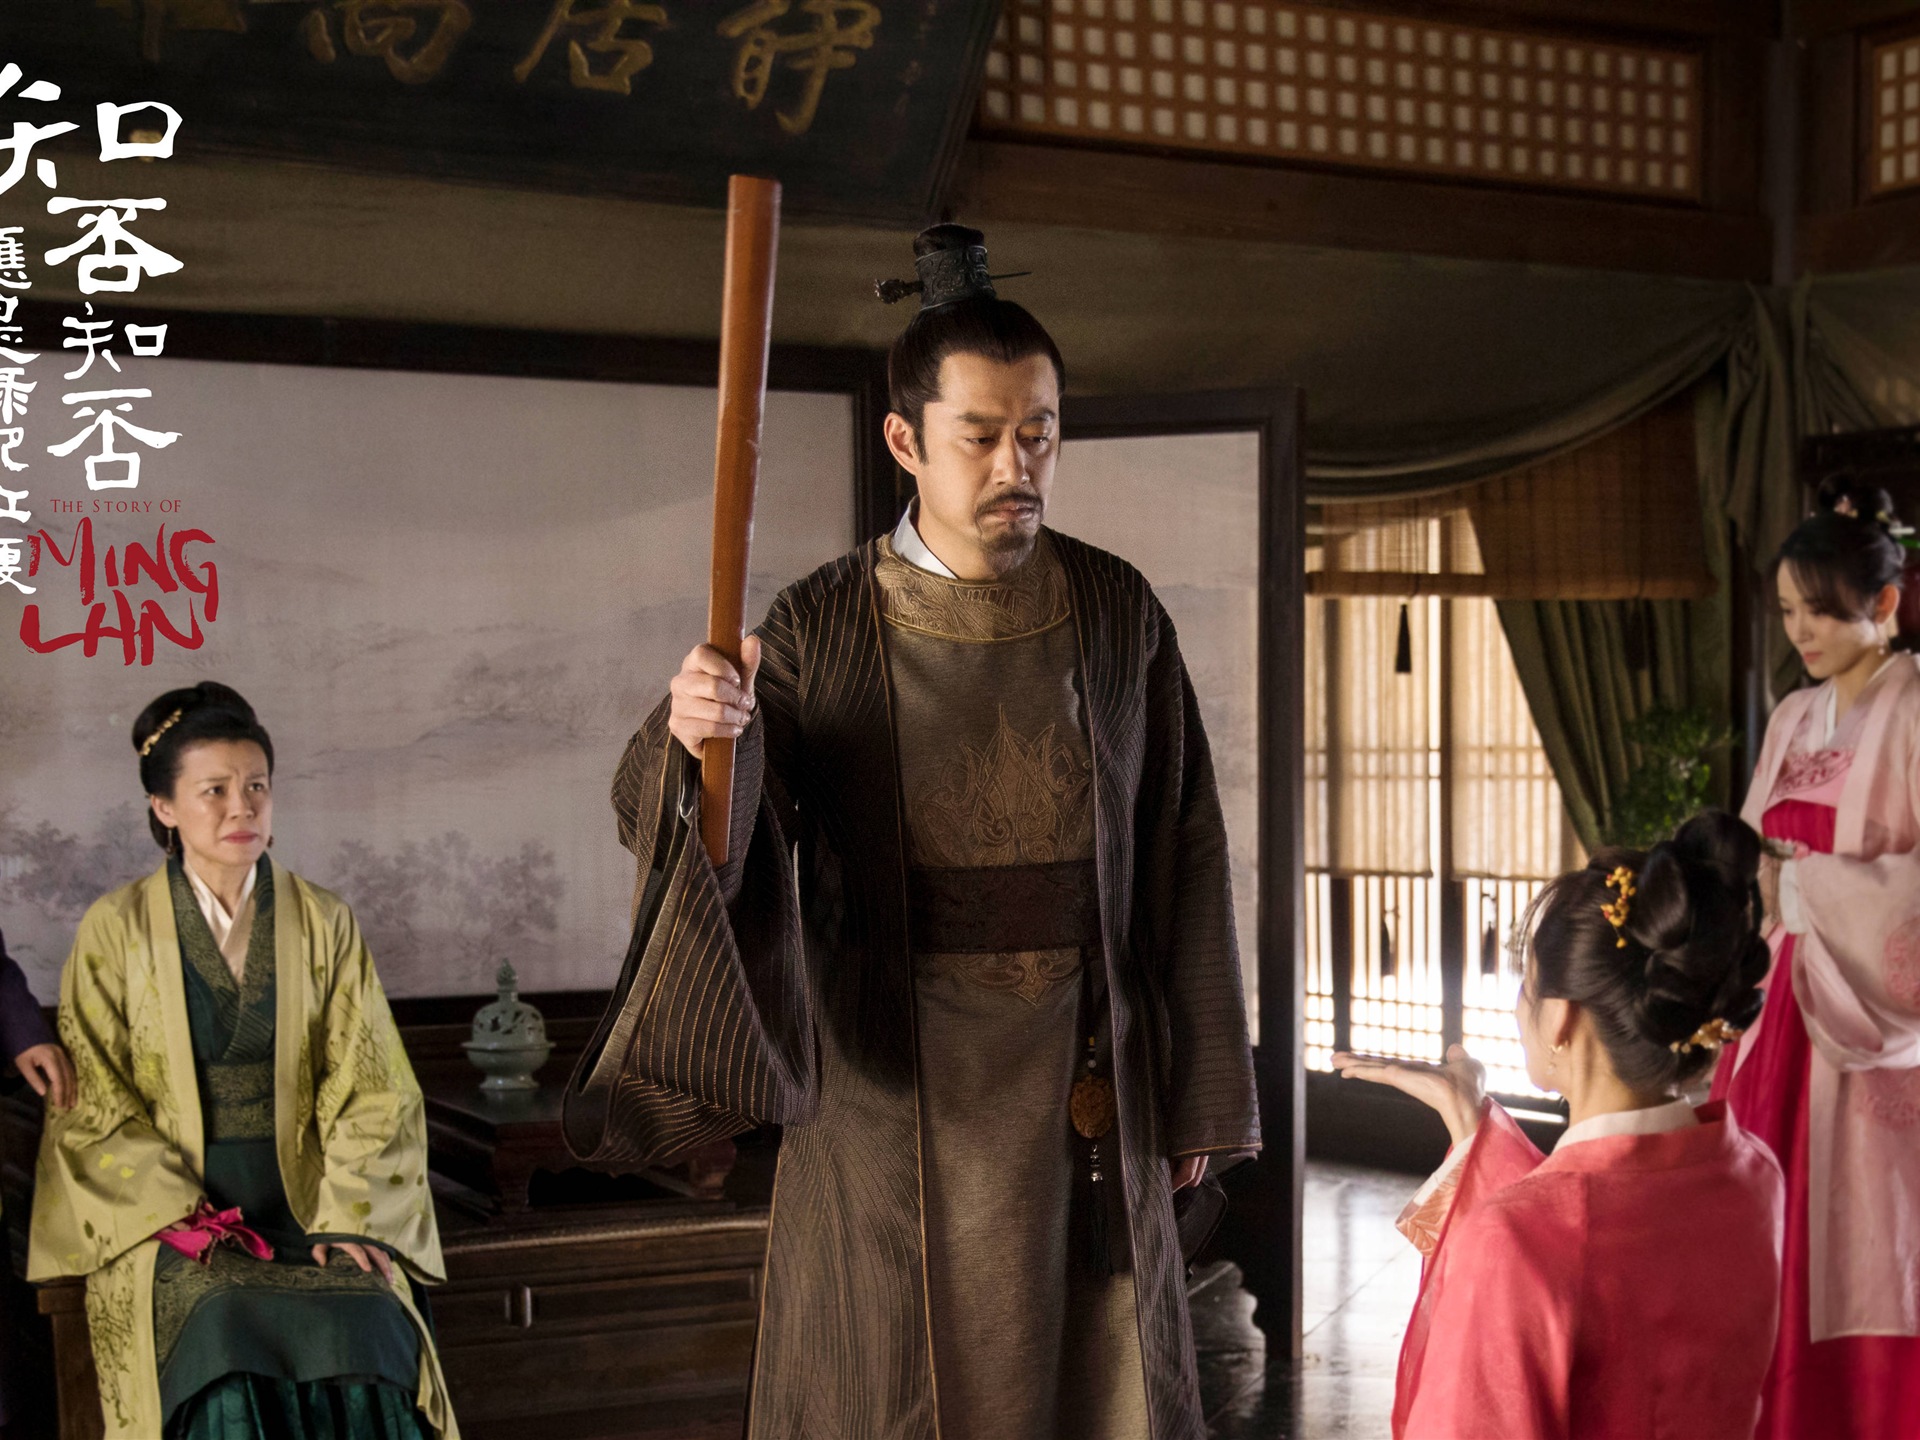 The Story Of MingLan, TV series HD wallpapers #47 - 1920x1440